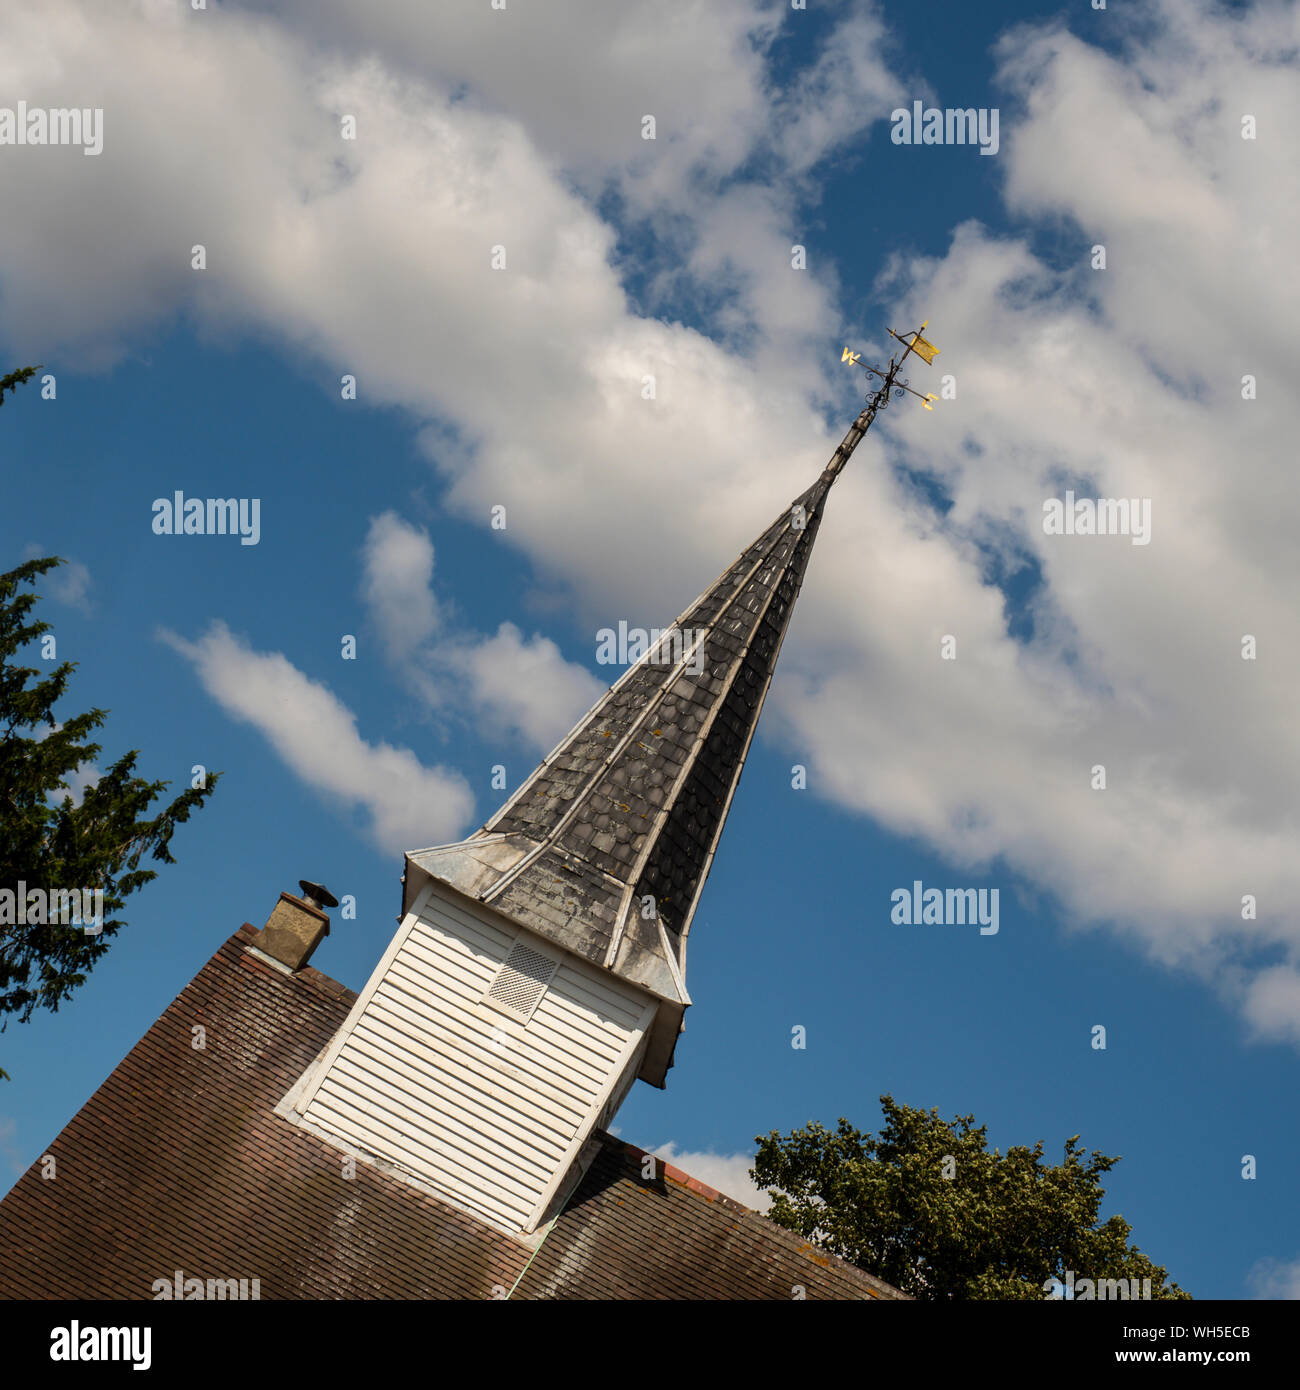 HADLEIGH, ESSEX, UK - AUGUST 08, 2018:  The steeple of St James the Less Parish Church Stock Photo